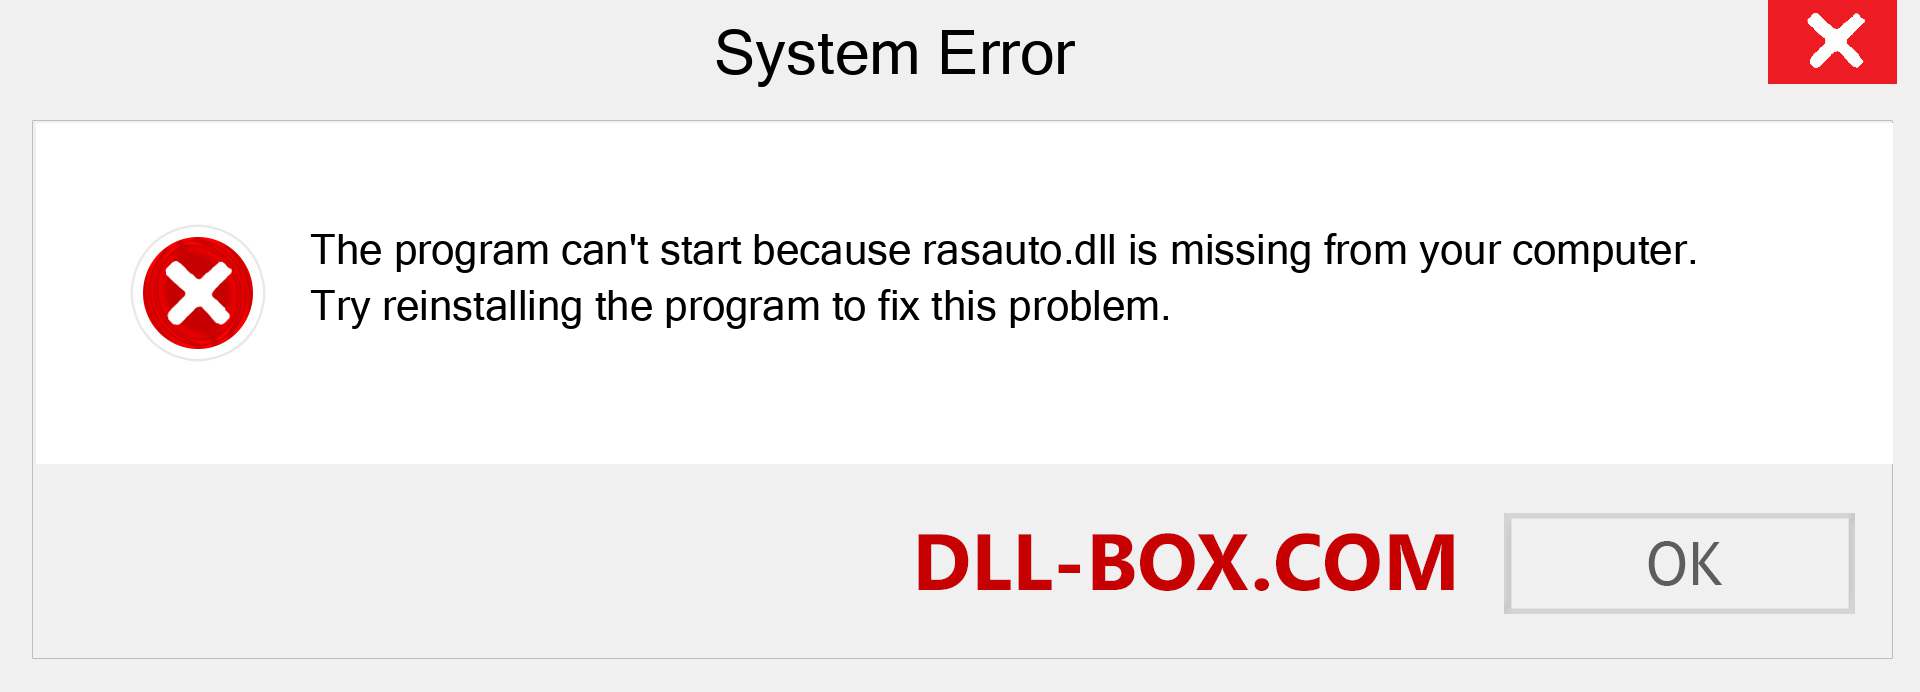  rasauto.dll file is missing?. Download for Windows 7, 8, 10 - Fix  rasauto dll Missing Error on Windows, photos, images